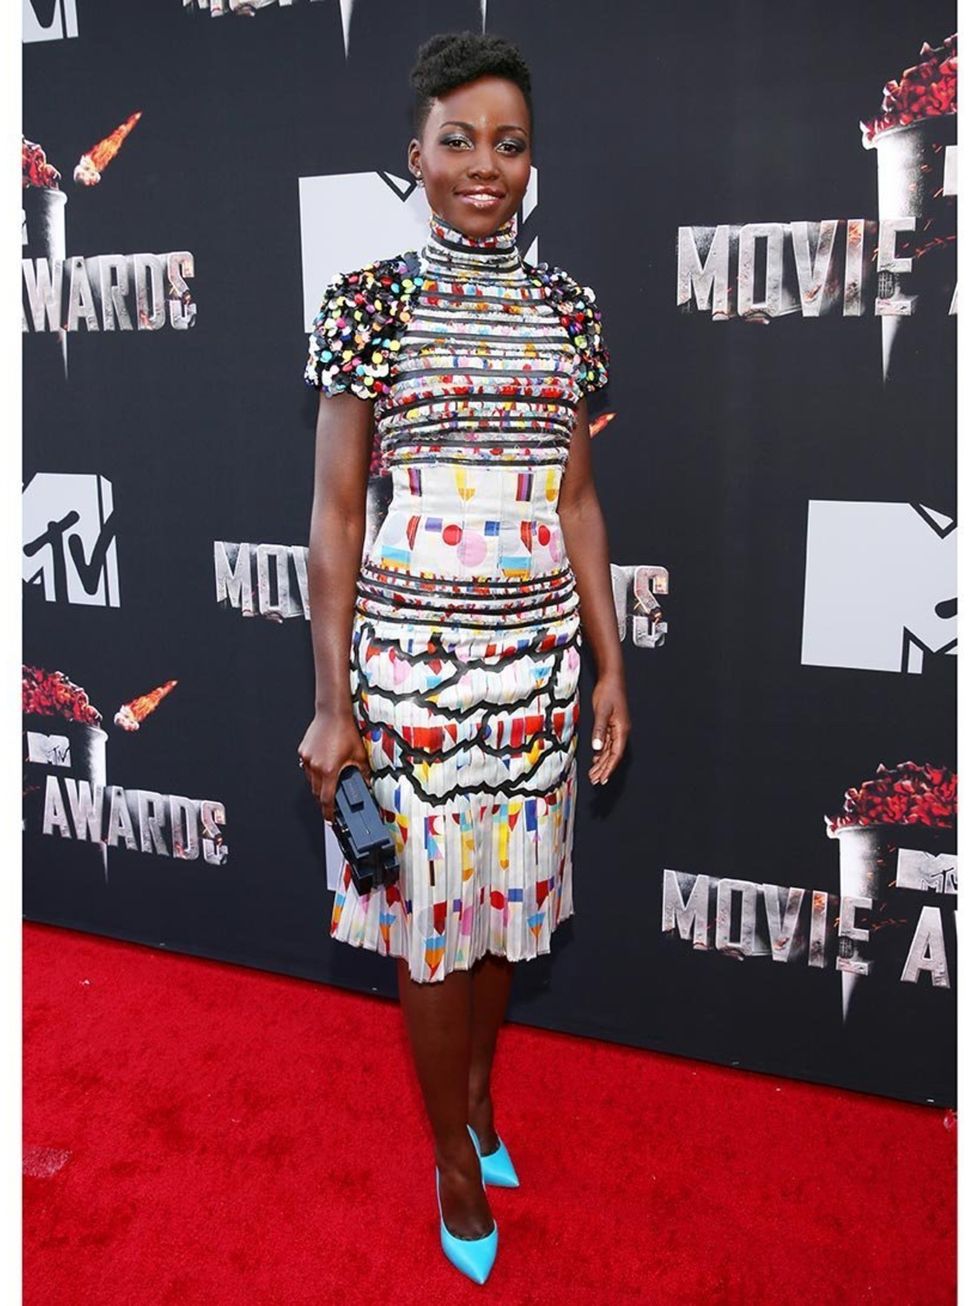 <p><a href="http://www.elleuk.com/star-style/celebrity-style-files/lupita-nyong-o-style-file-actress-miu-miu-chanel-couture">Lupita Nyong'o</a> wears a Chanel dress and Casadei shoes to the 2014 MTV Movie Awards.</p>